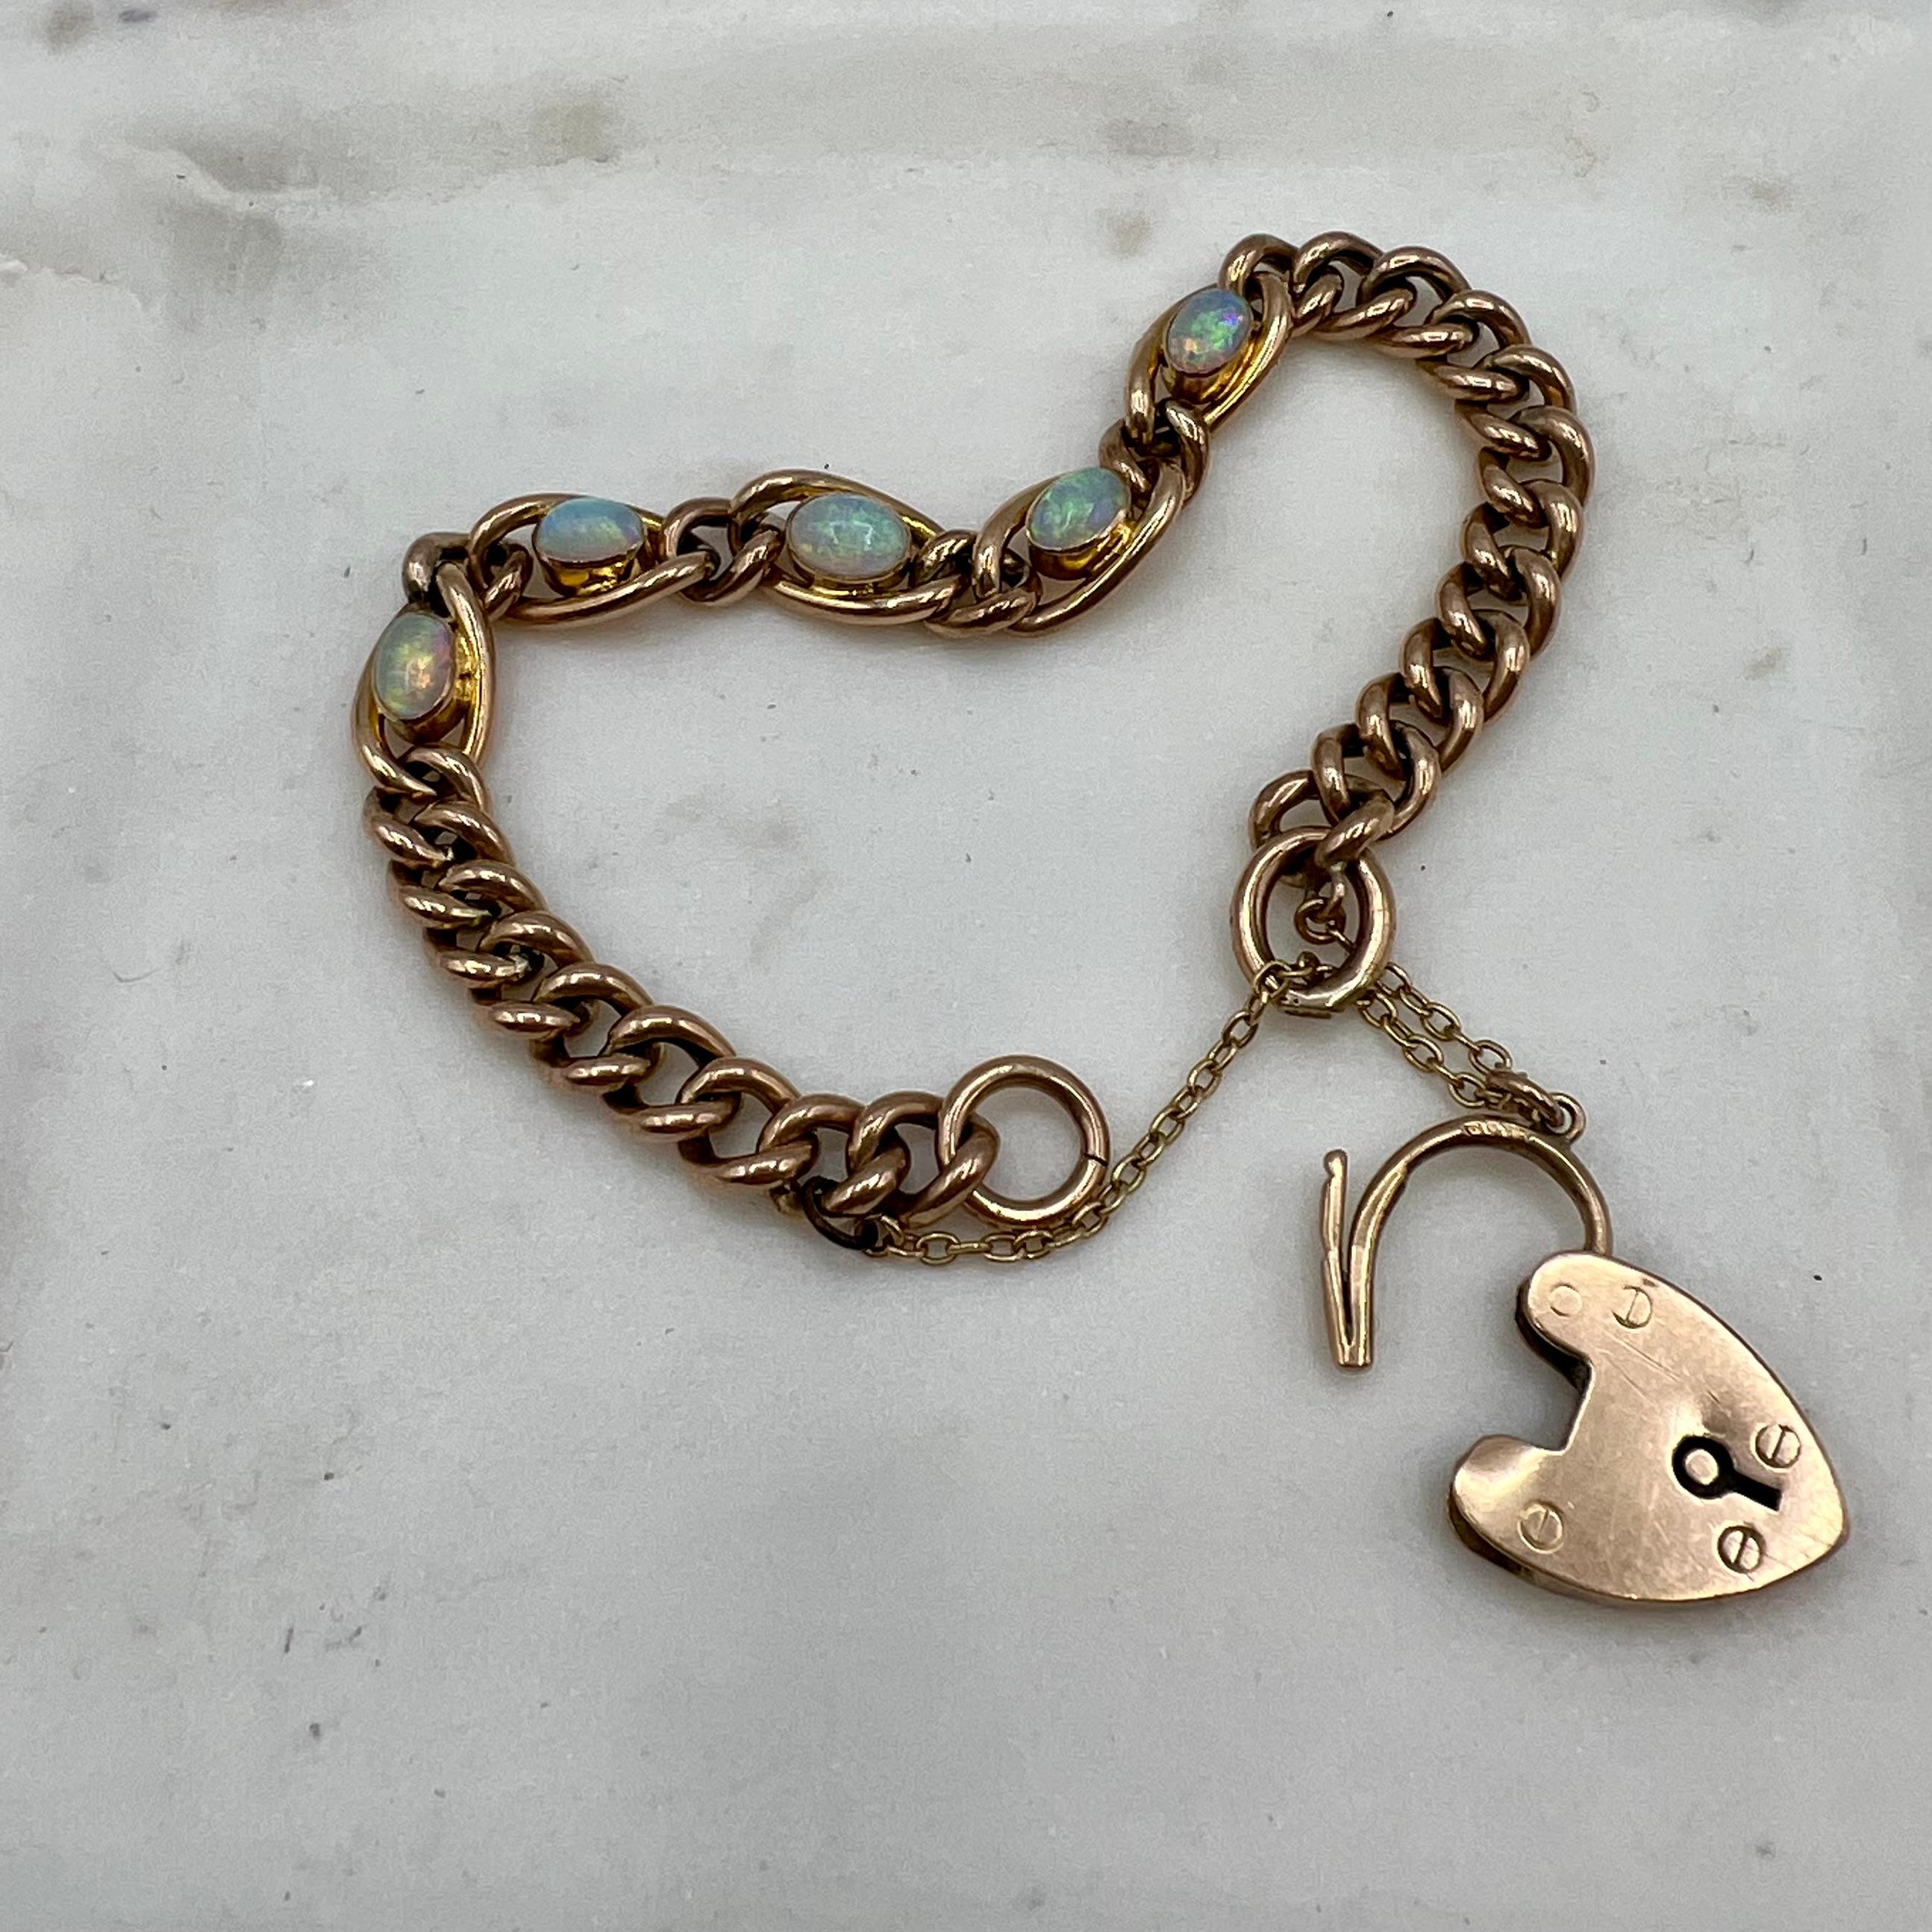 Cabochon Victorian 9 Carat Rose Gold and Opal Heart Locket Chain Bracelet